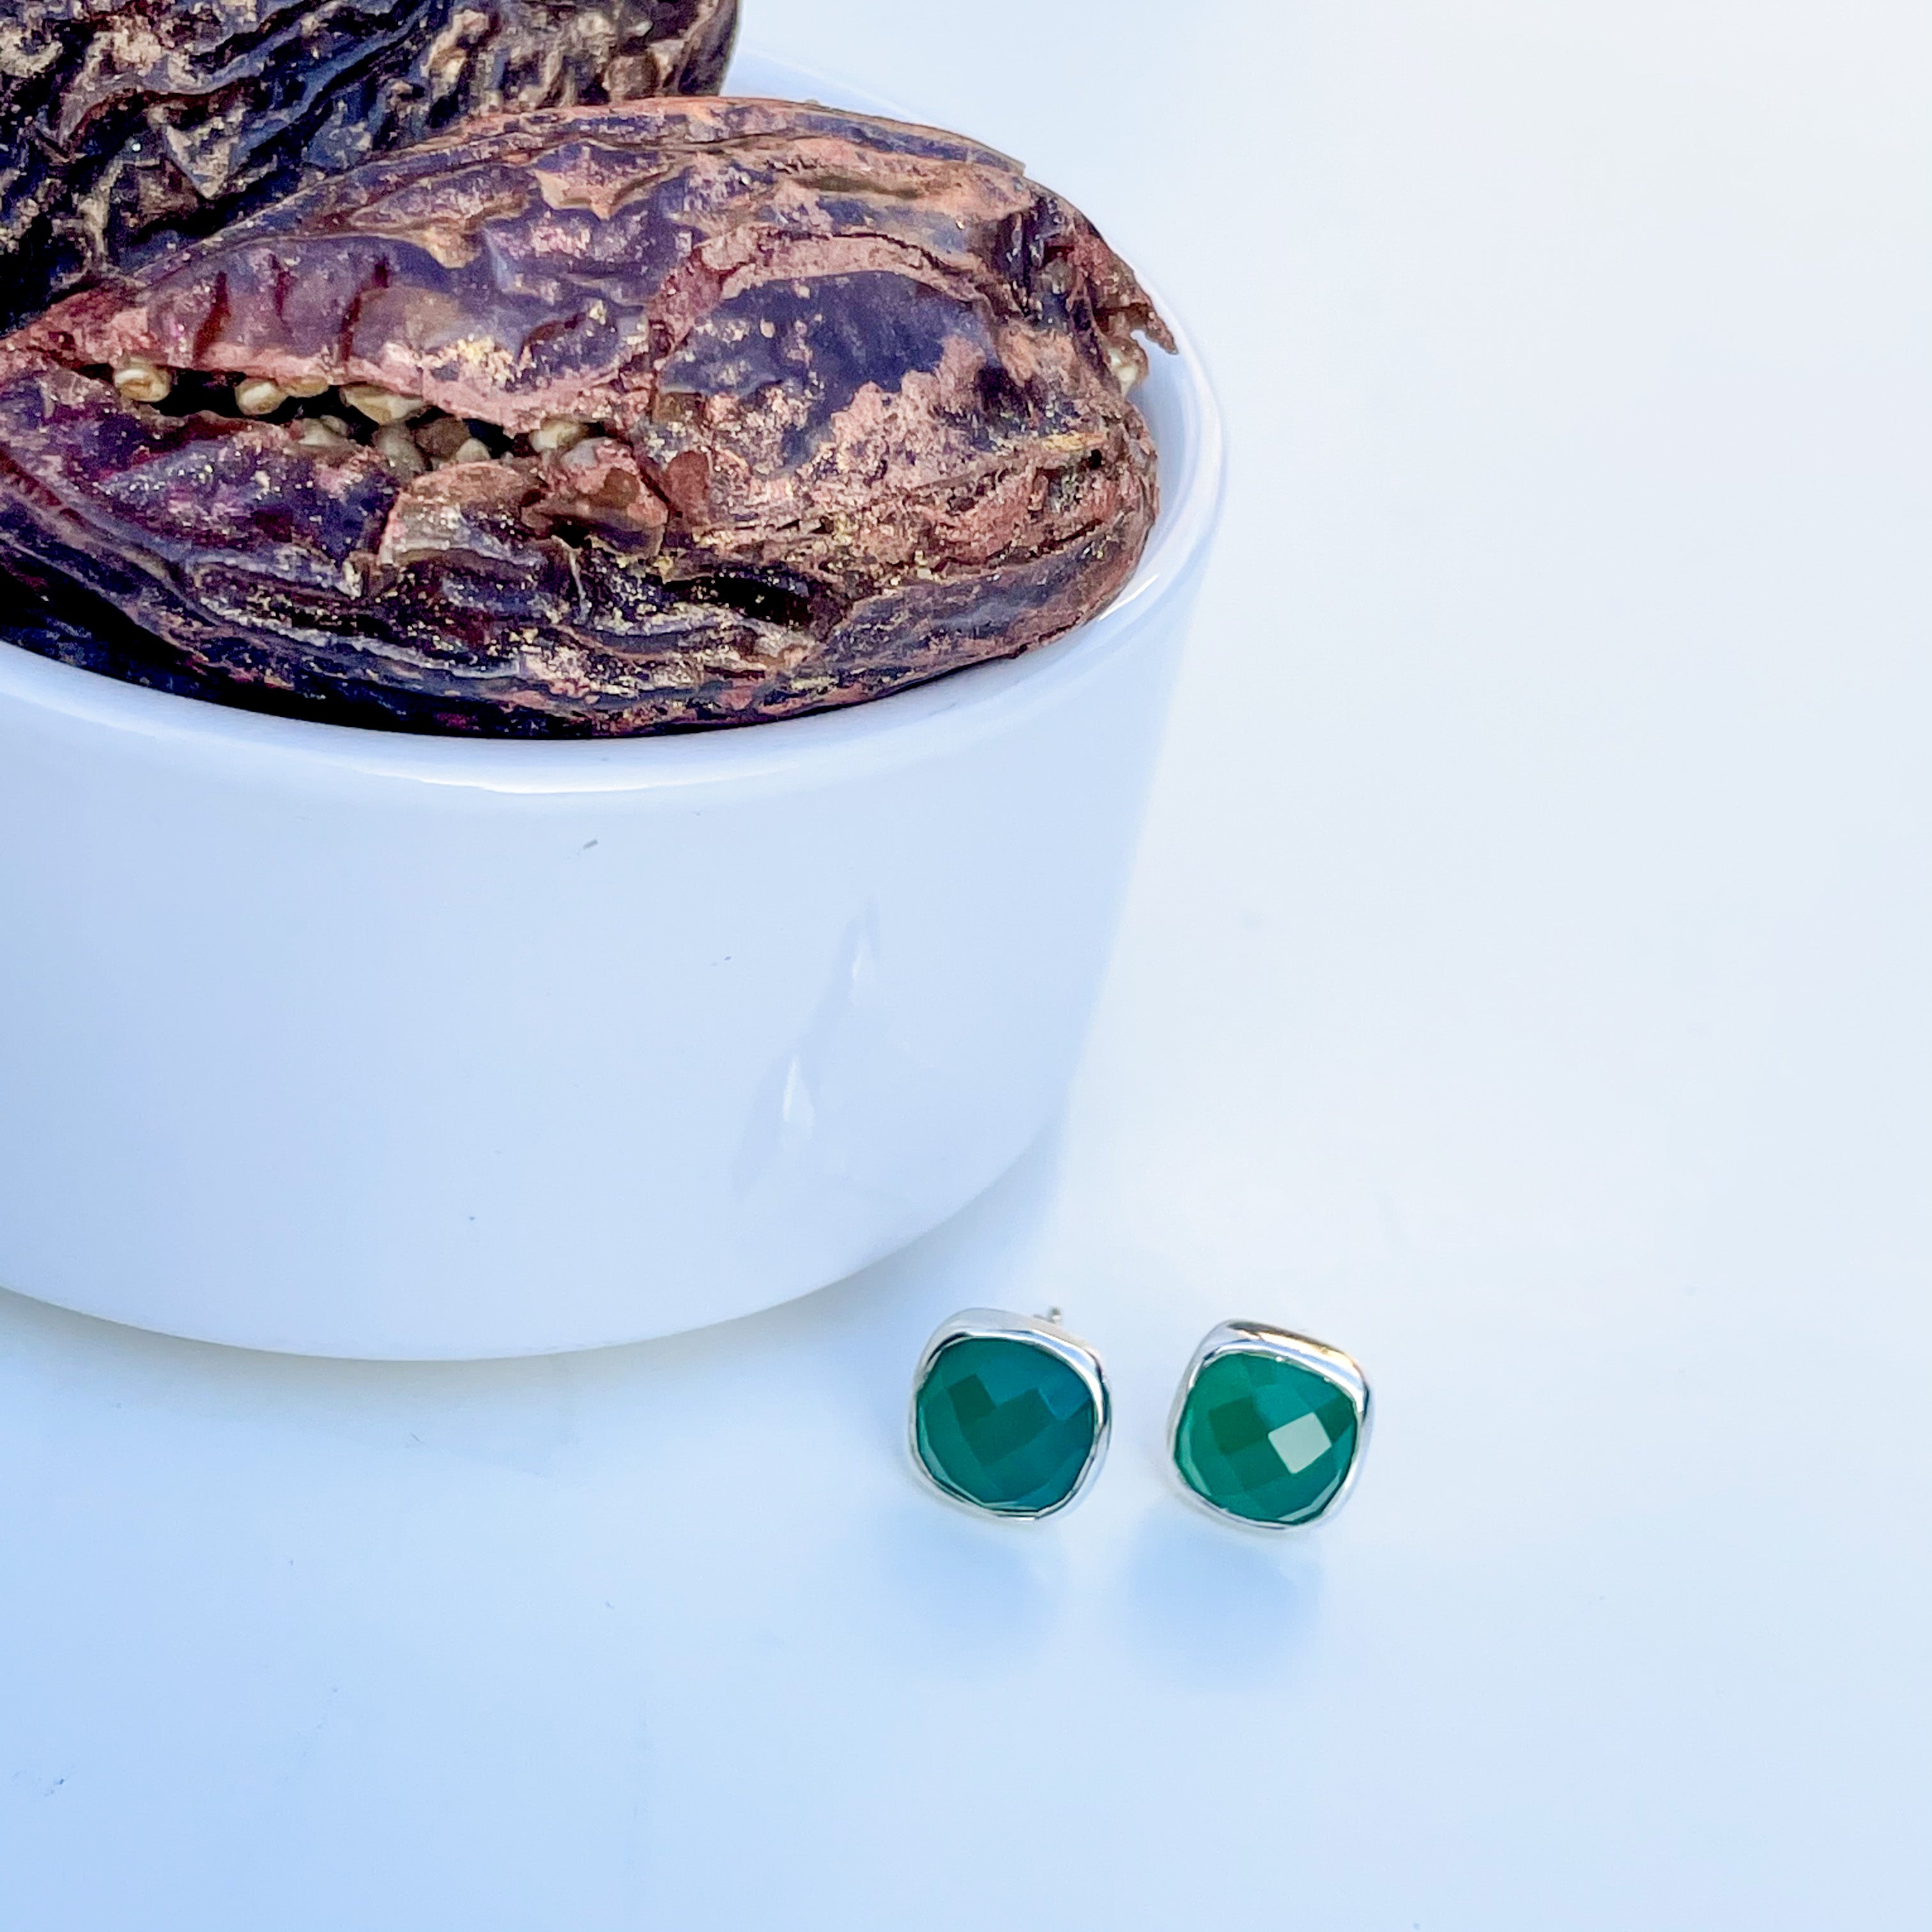 Green Onyx Studs in Sterling Silver with a box of 4 Stuffed Medjool Dates